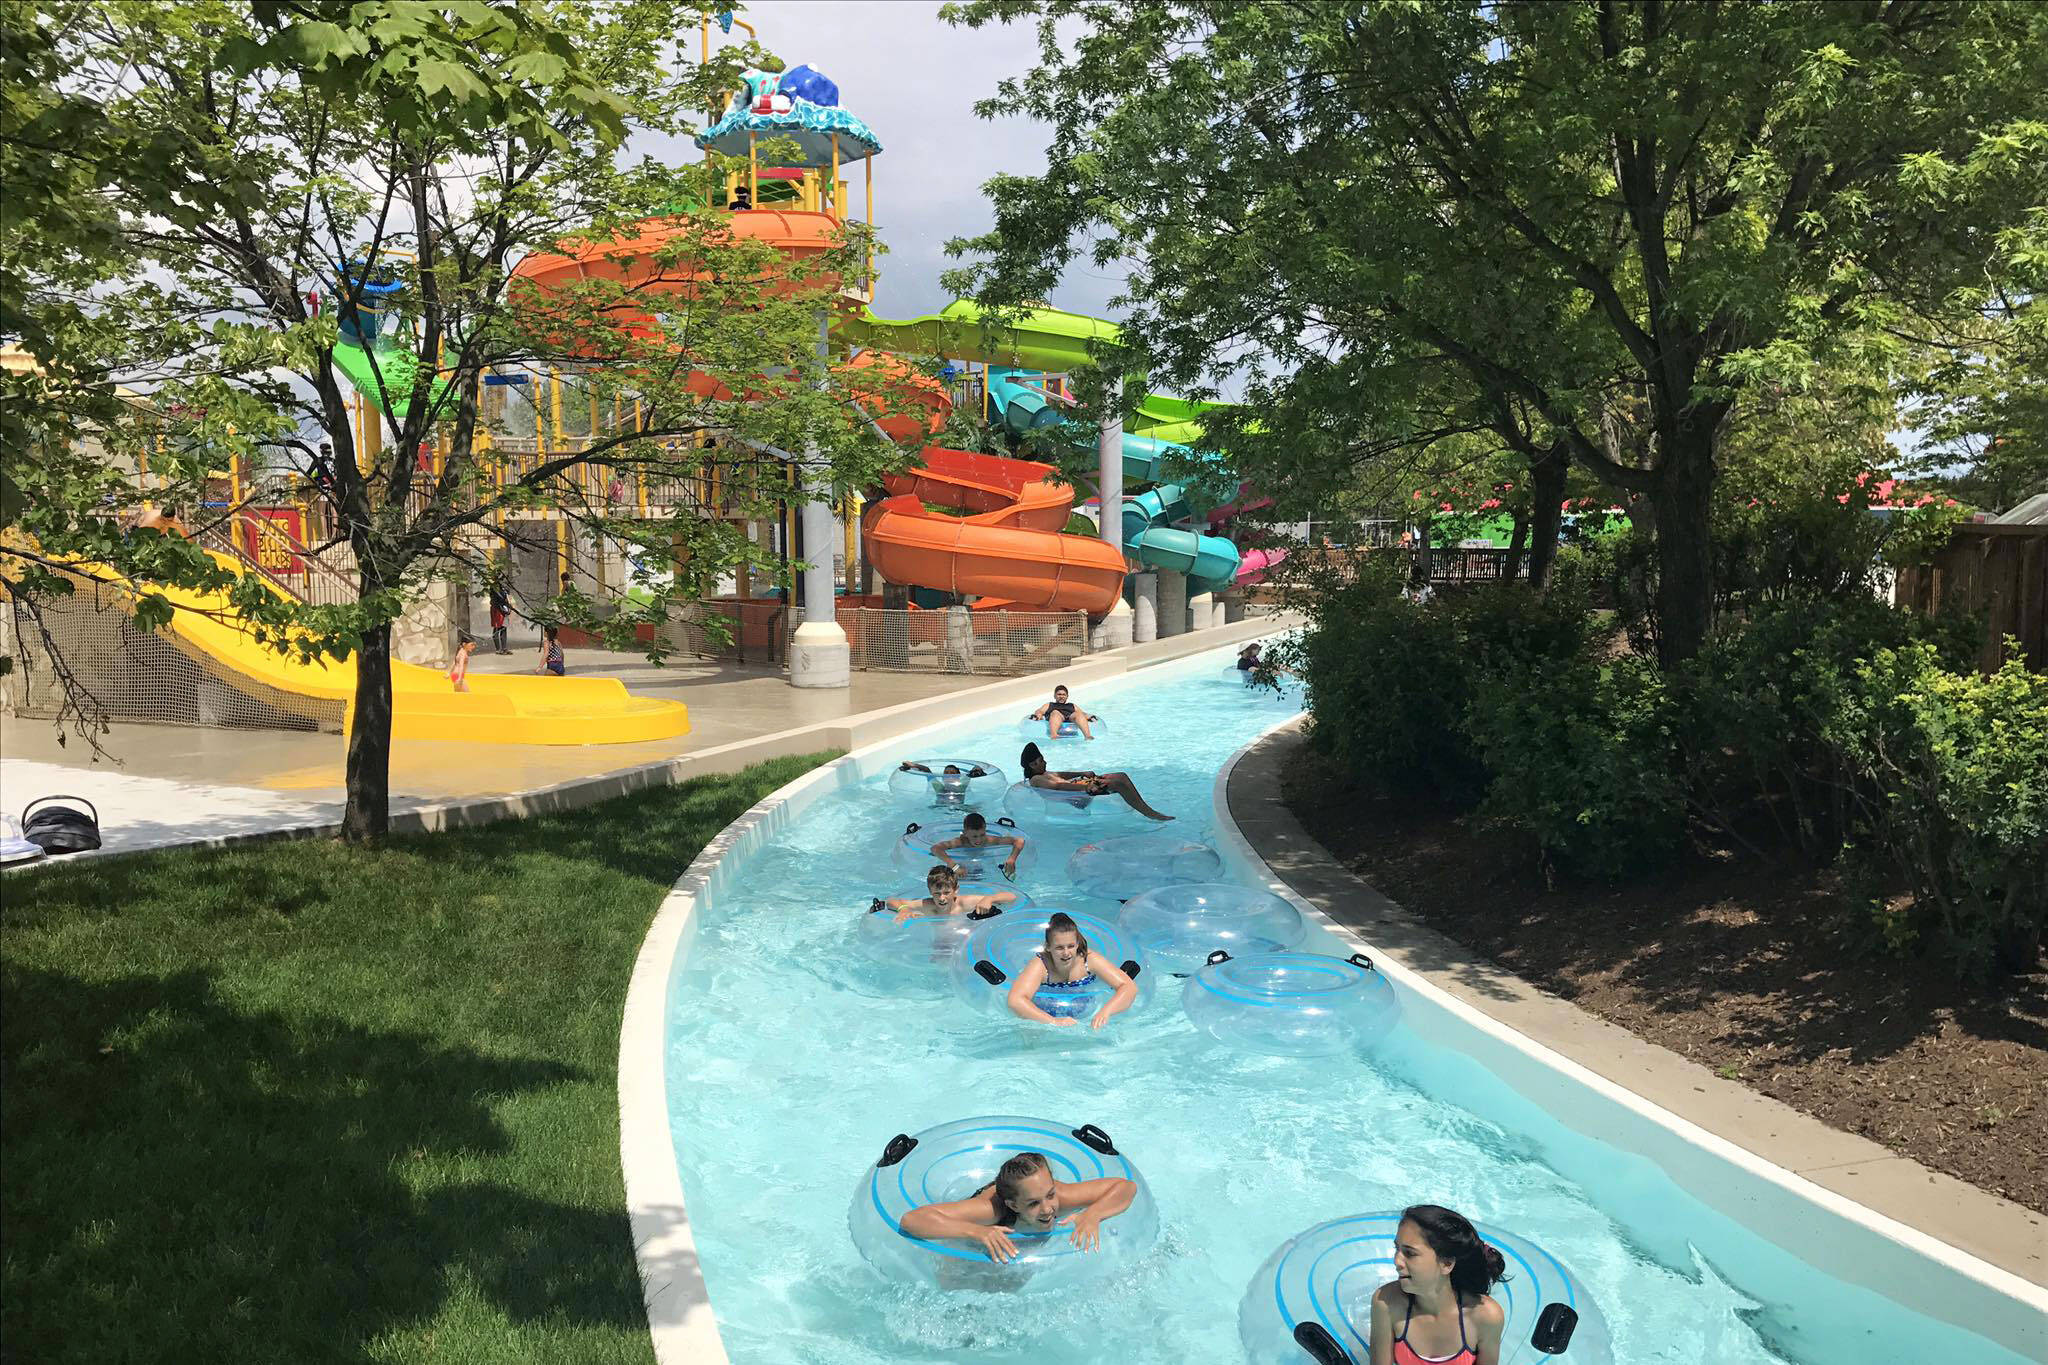 Toronto's biggest waterpark opens for the season this weekend